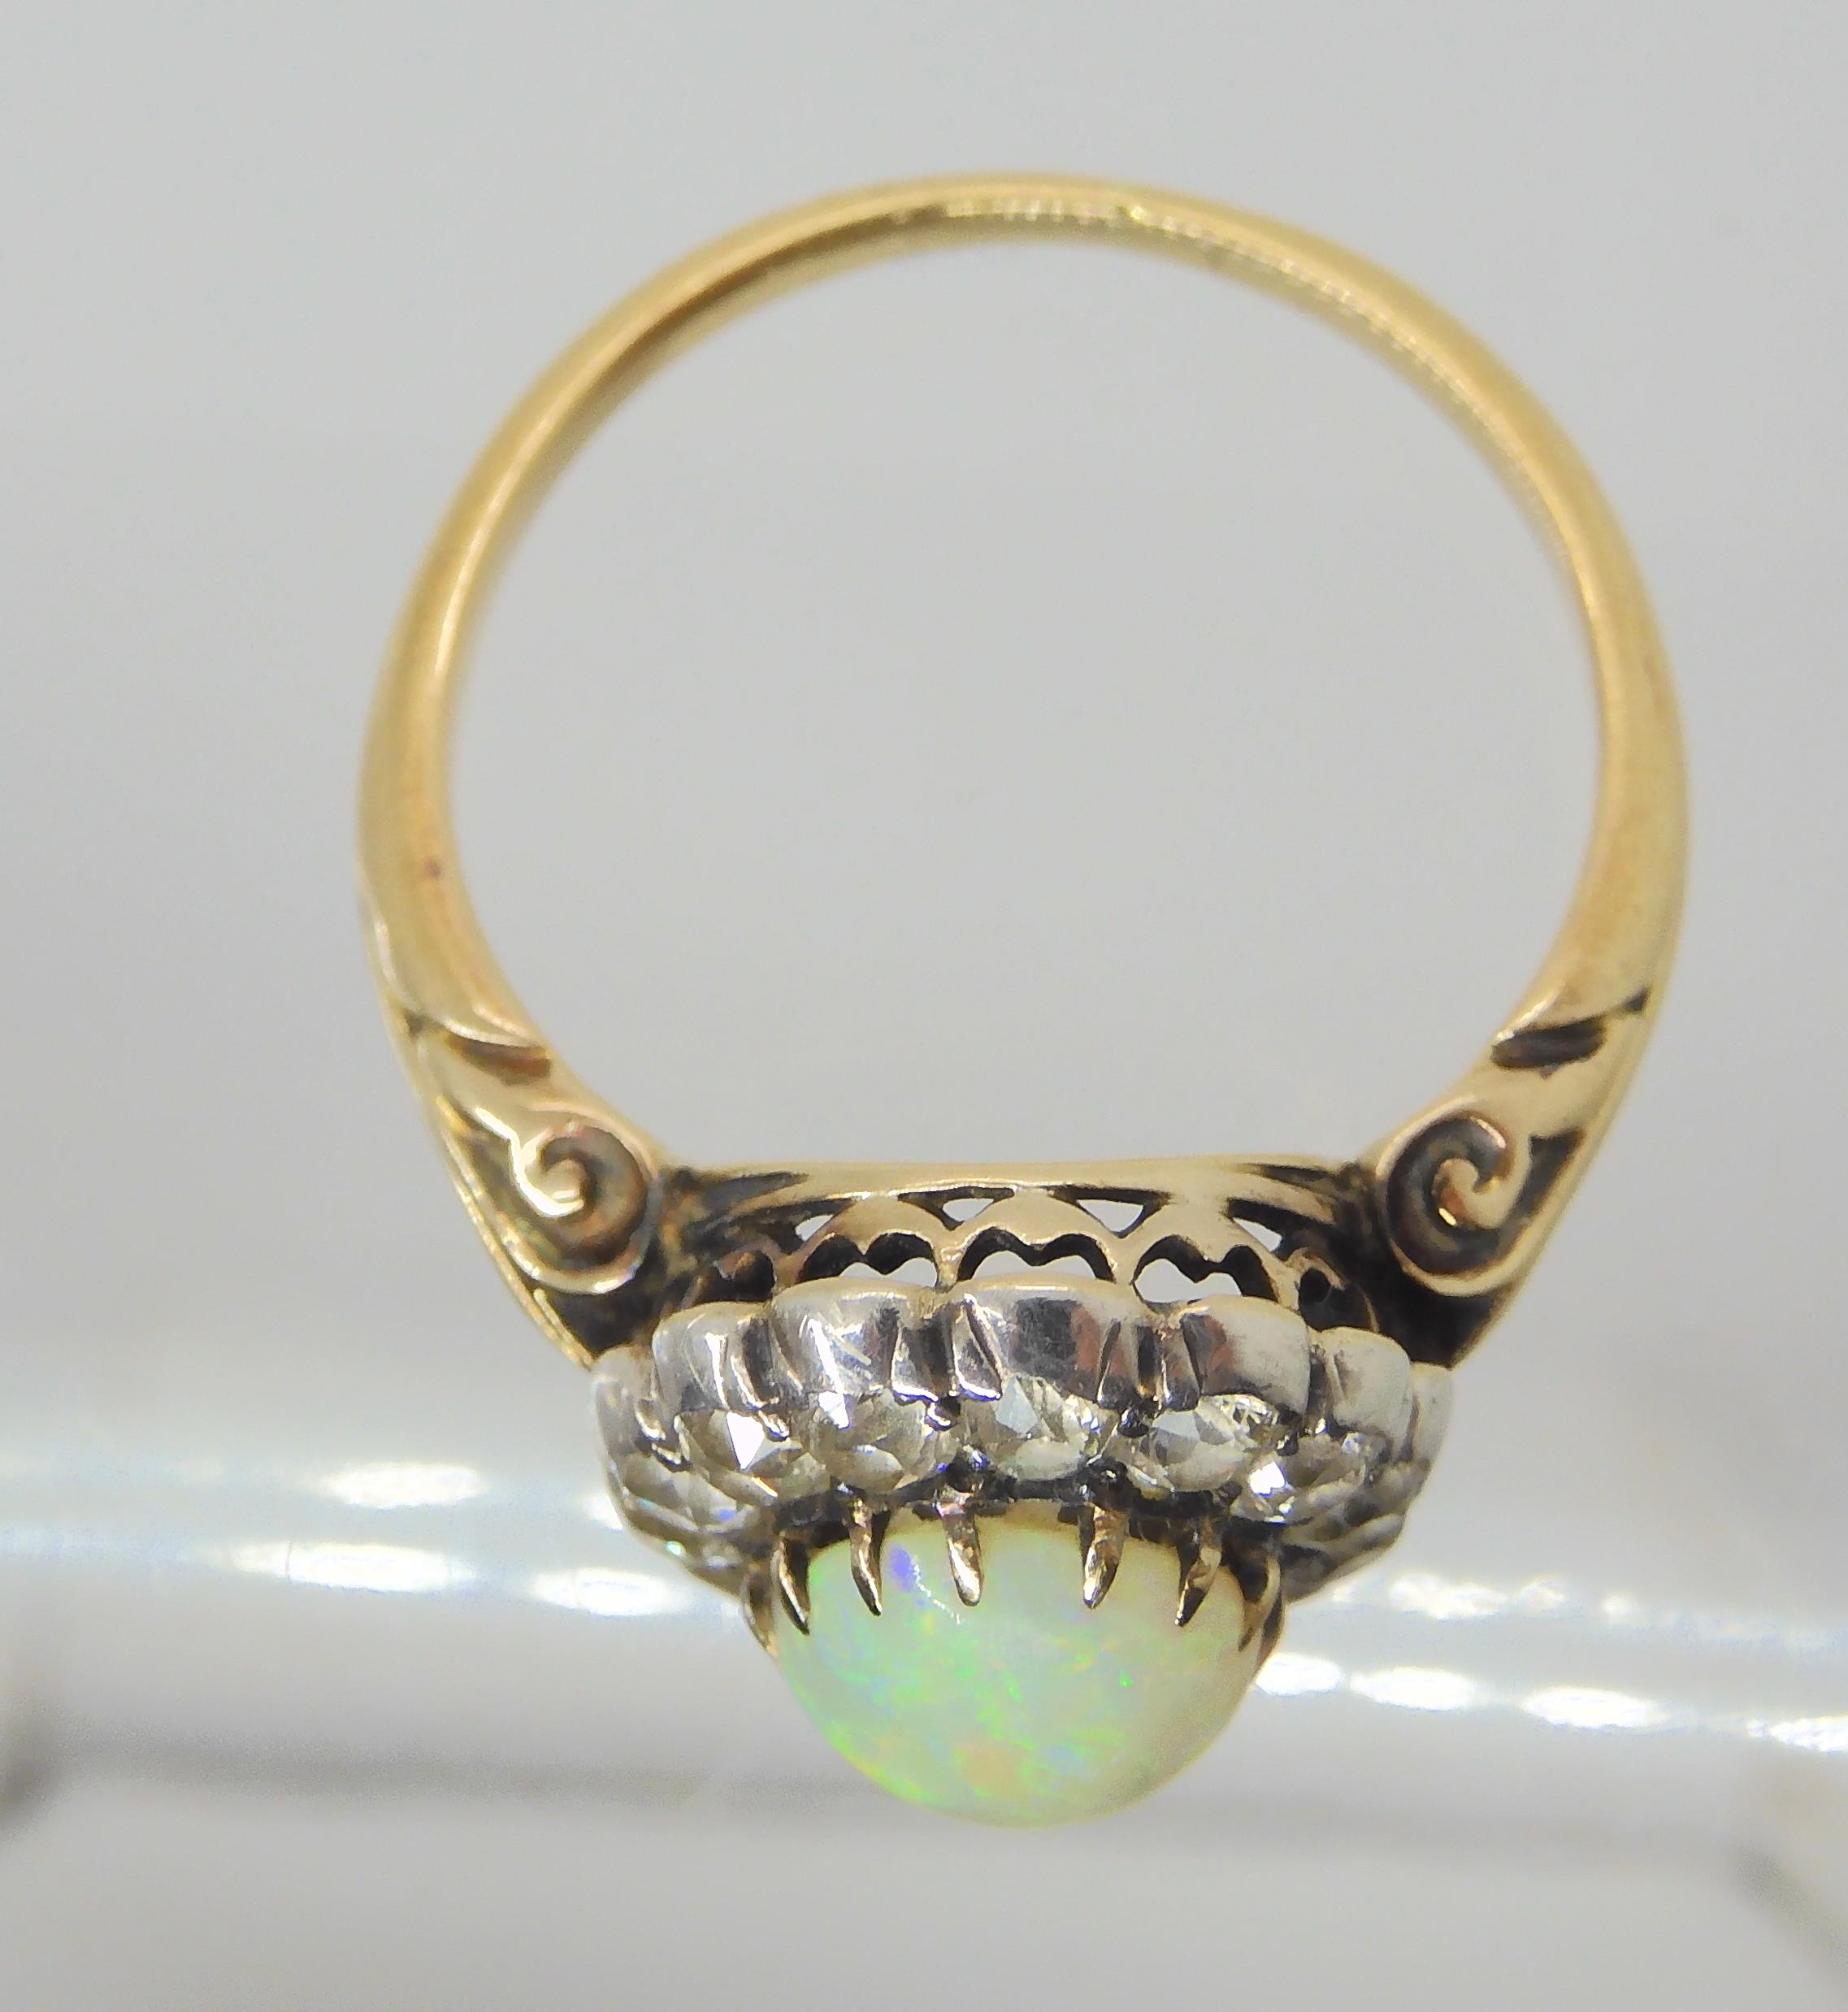 AN OPAL AND DIAMOND RING set with a high domed opal of approx 8.8mm x 7.1mm x 4.1mm, surrounded with - Image 4 of 5